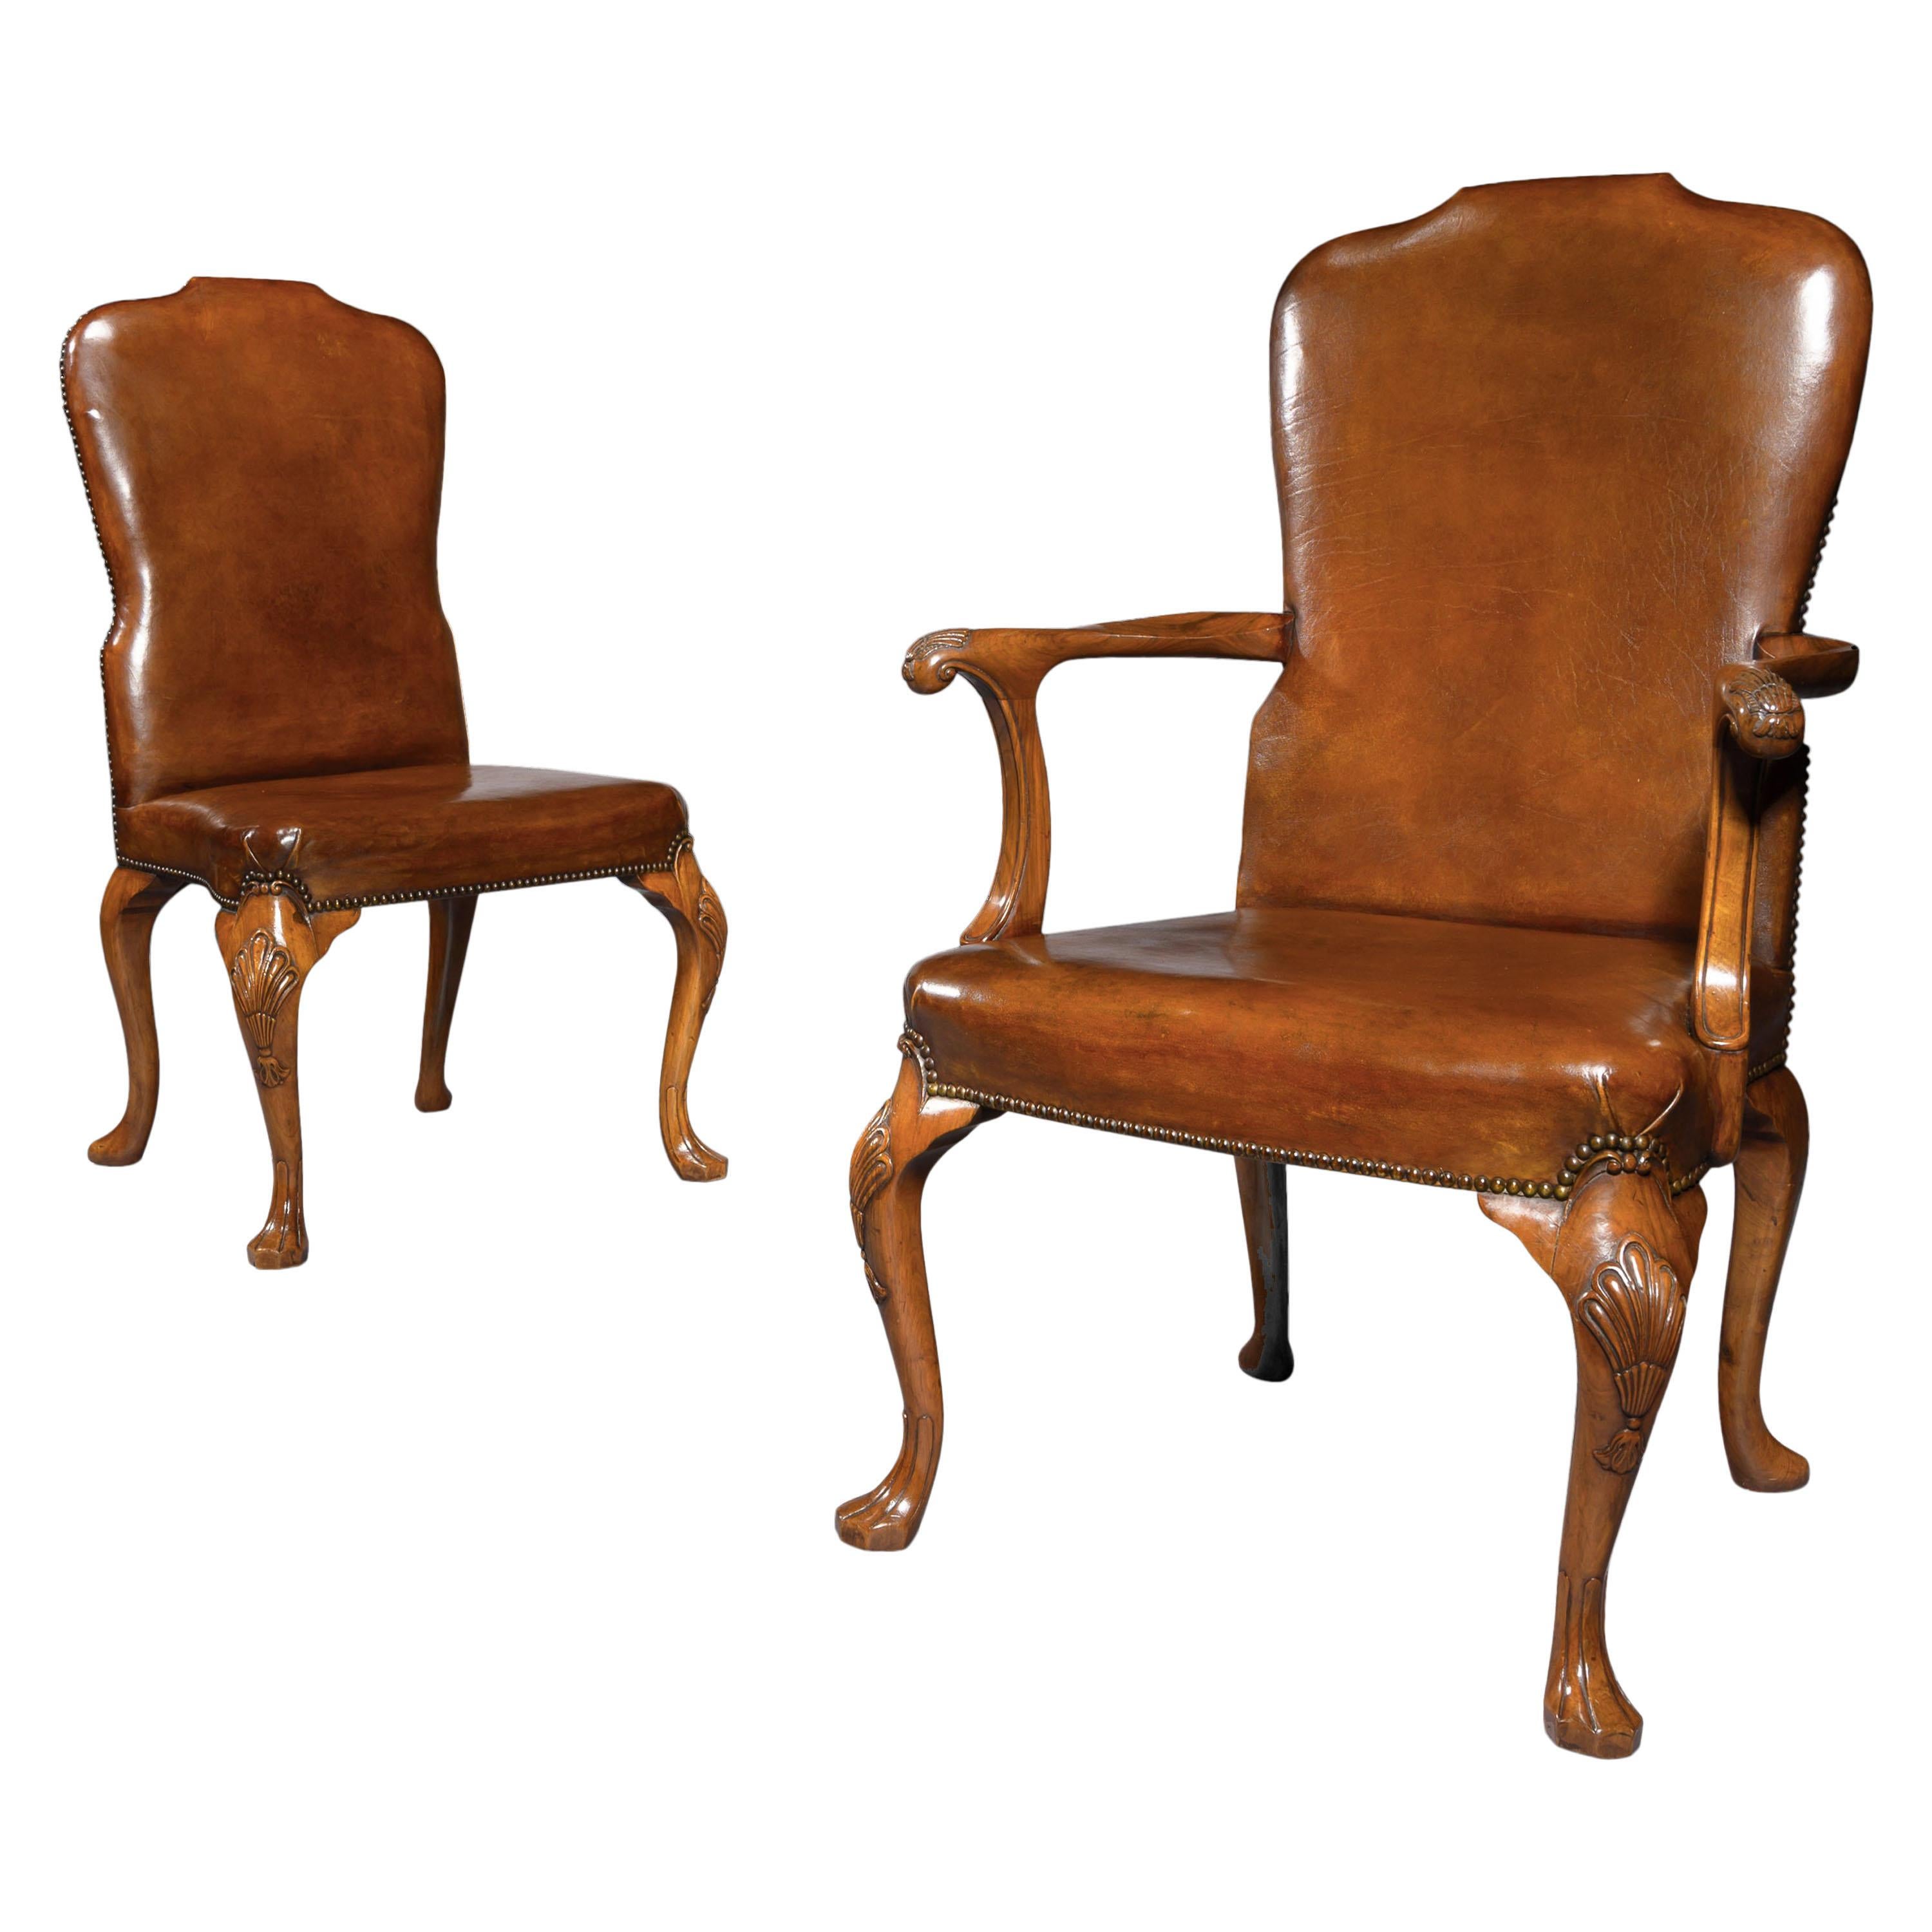 Fine Set of 8 '6 & 2' Generously Sized Antique Walnut and Leather Dining Chairs